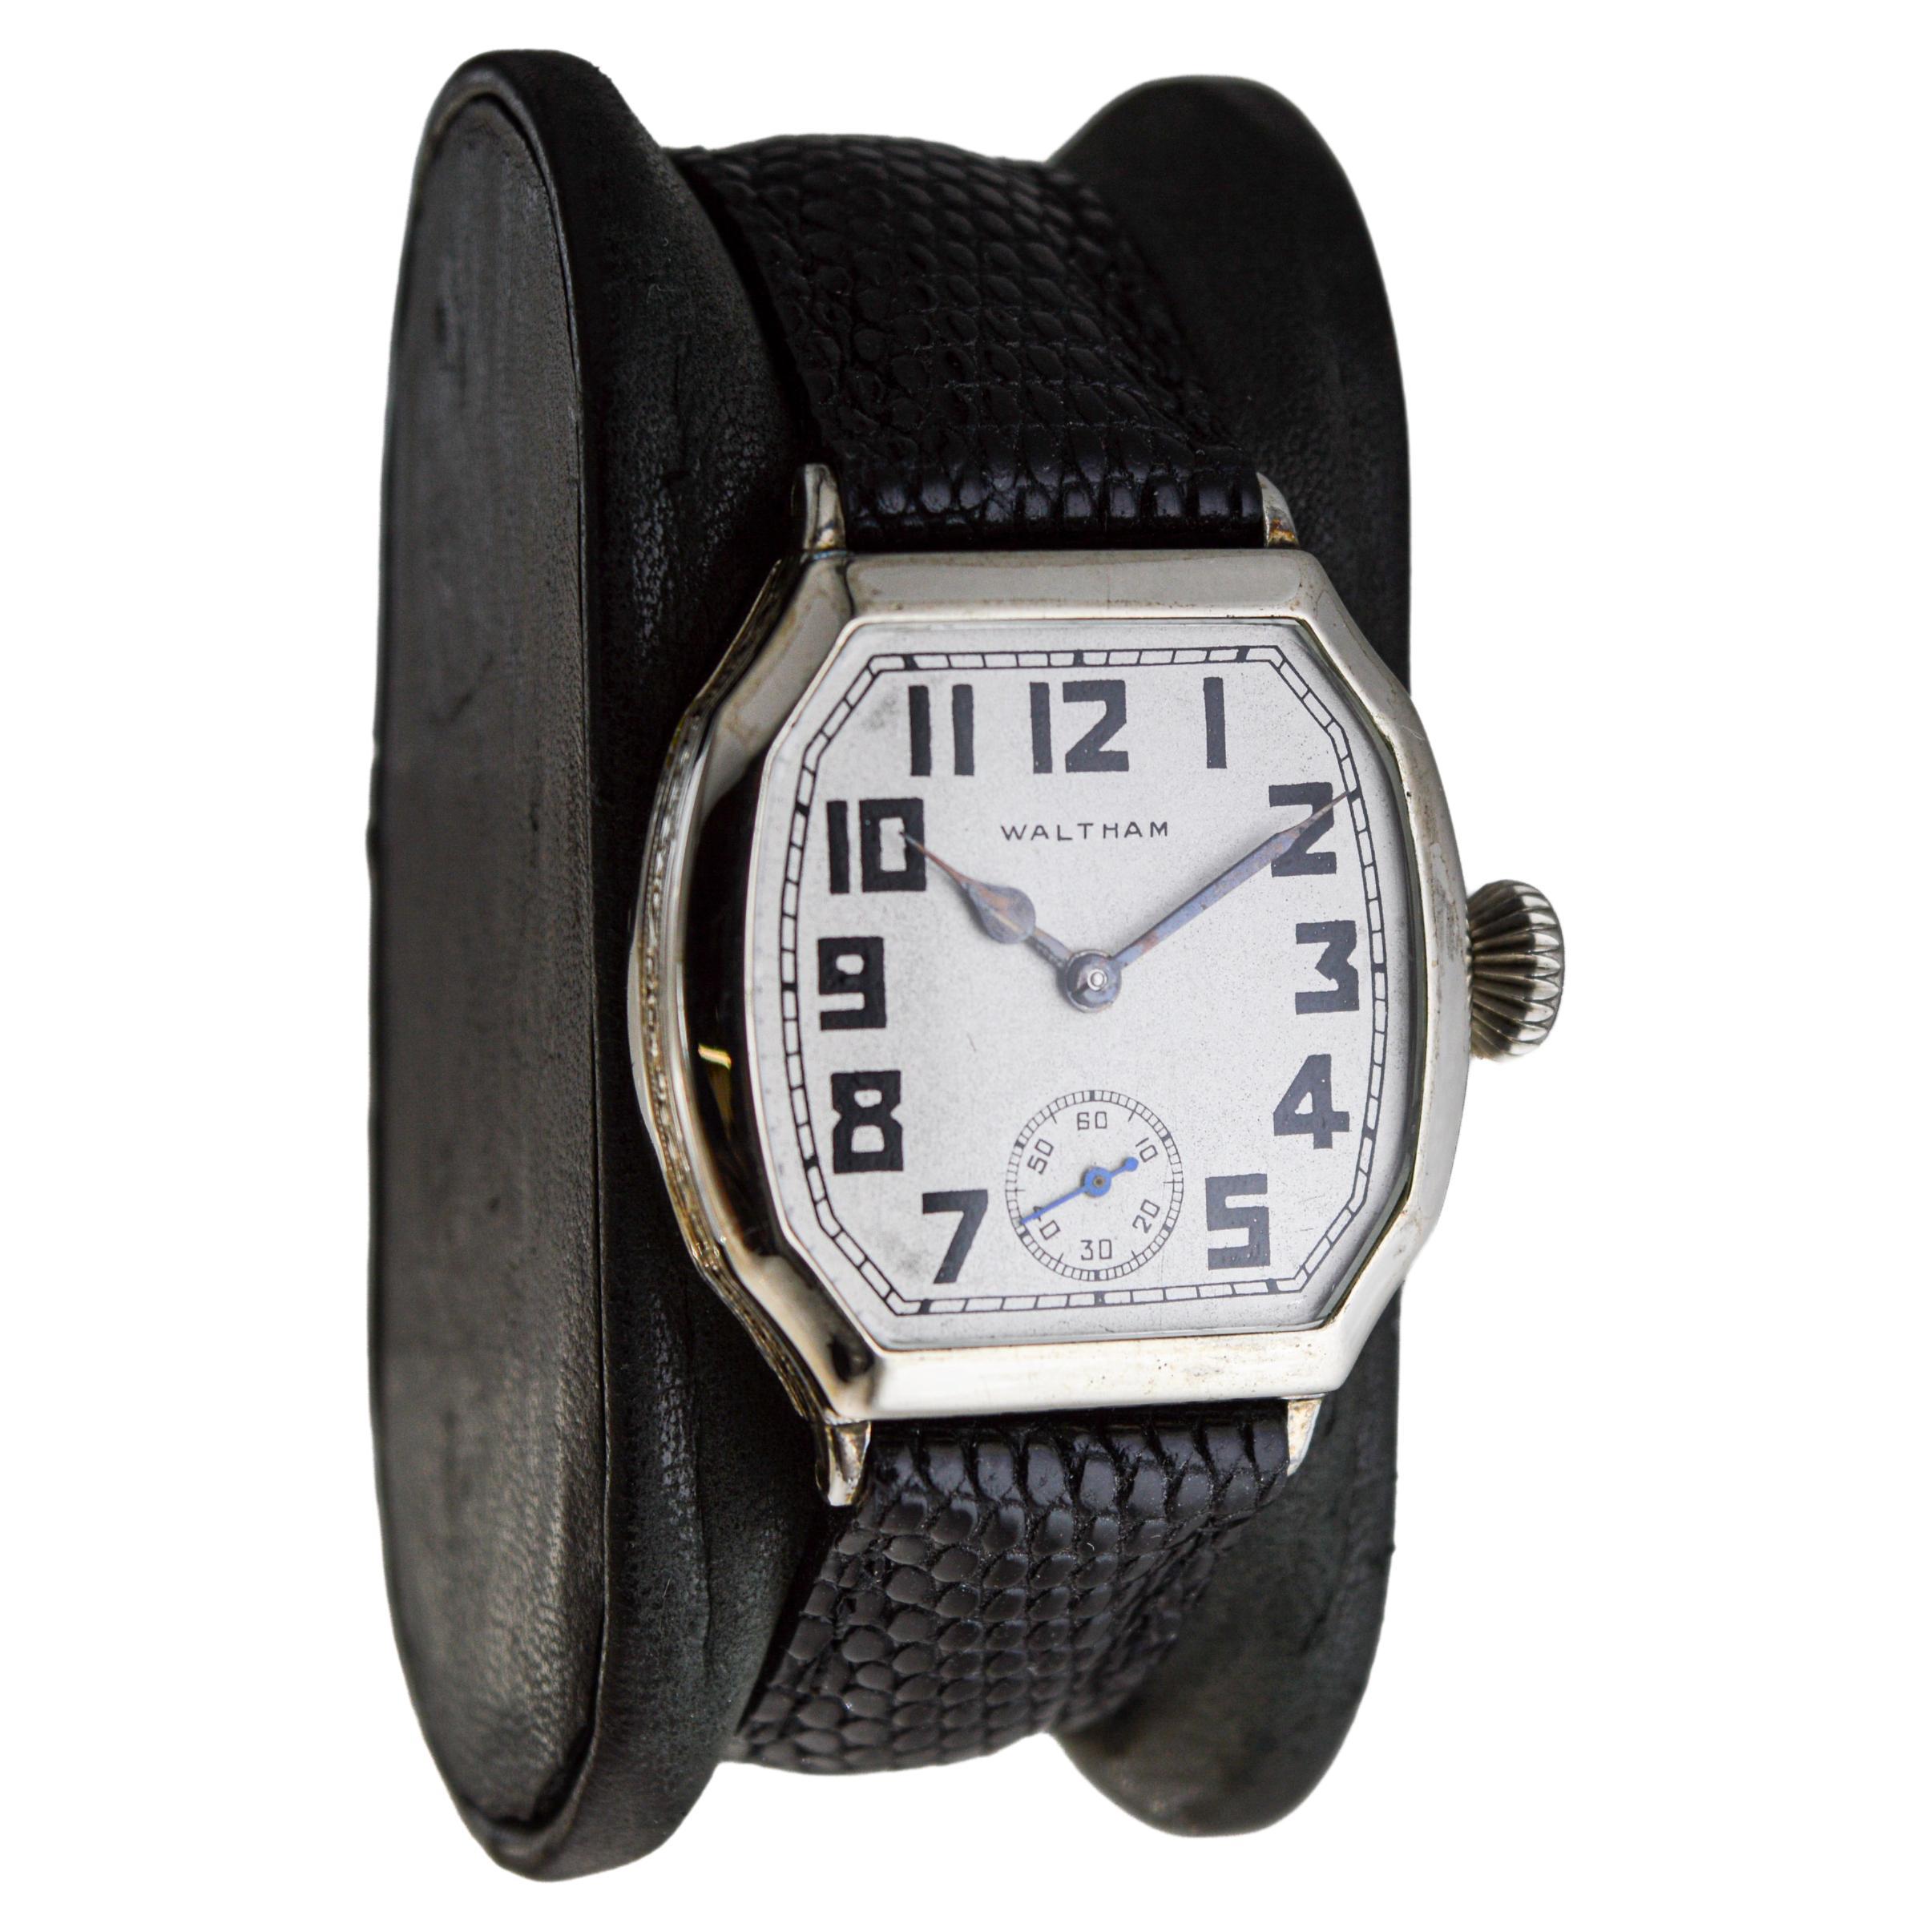 FACTORY / HOUSE: Waltham Watch Company
STYLE / REFERENCE: Art Deco / Tortue Shape
METAL / MATERIAL: White Gold Filled 
CIRCA / YEAR: 1930
DIMENSIONS / SIZE: Length 37mm X Diameter 30mm
MOVEMENT / CALIBER: Manual Winding / 7 Jewels / Caliber